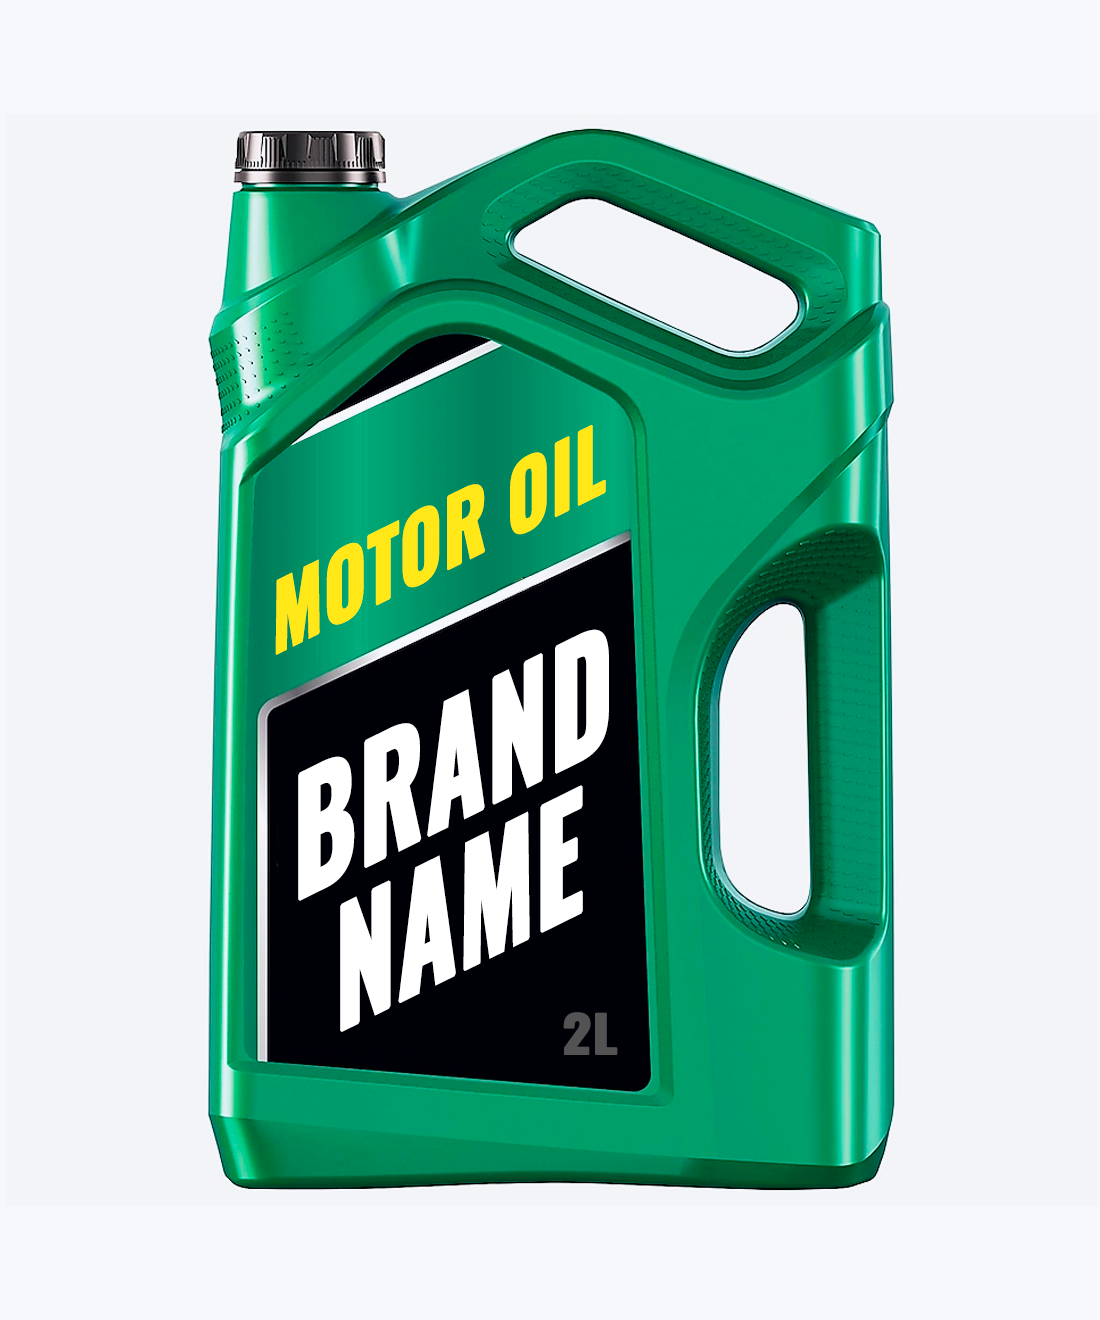 Conventional motor oil